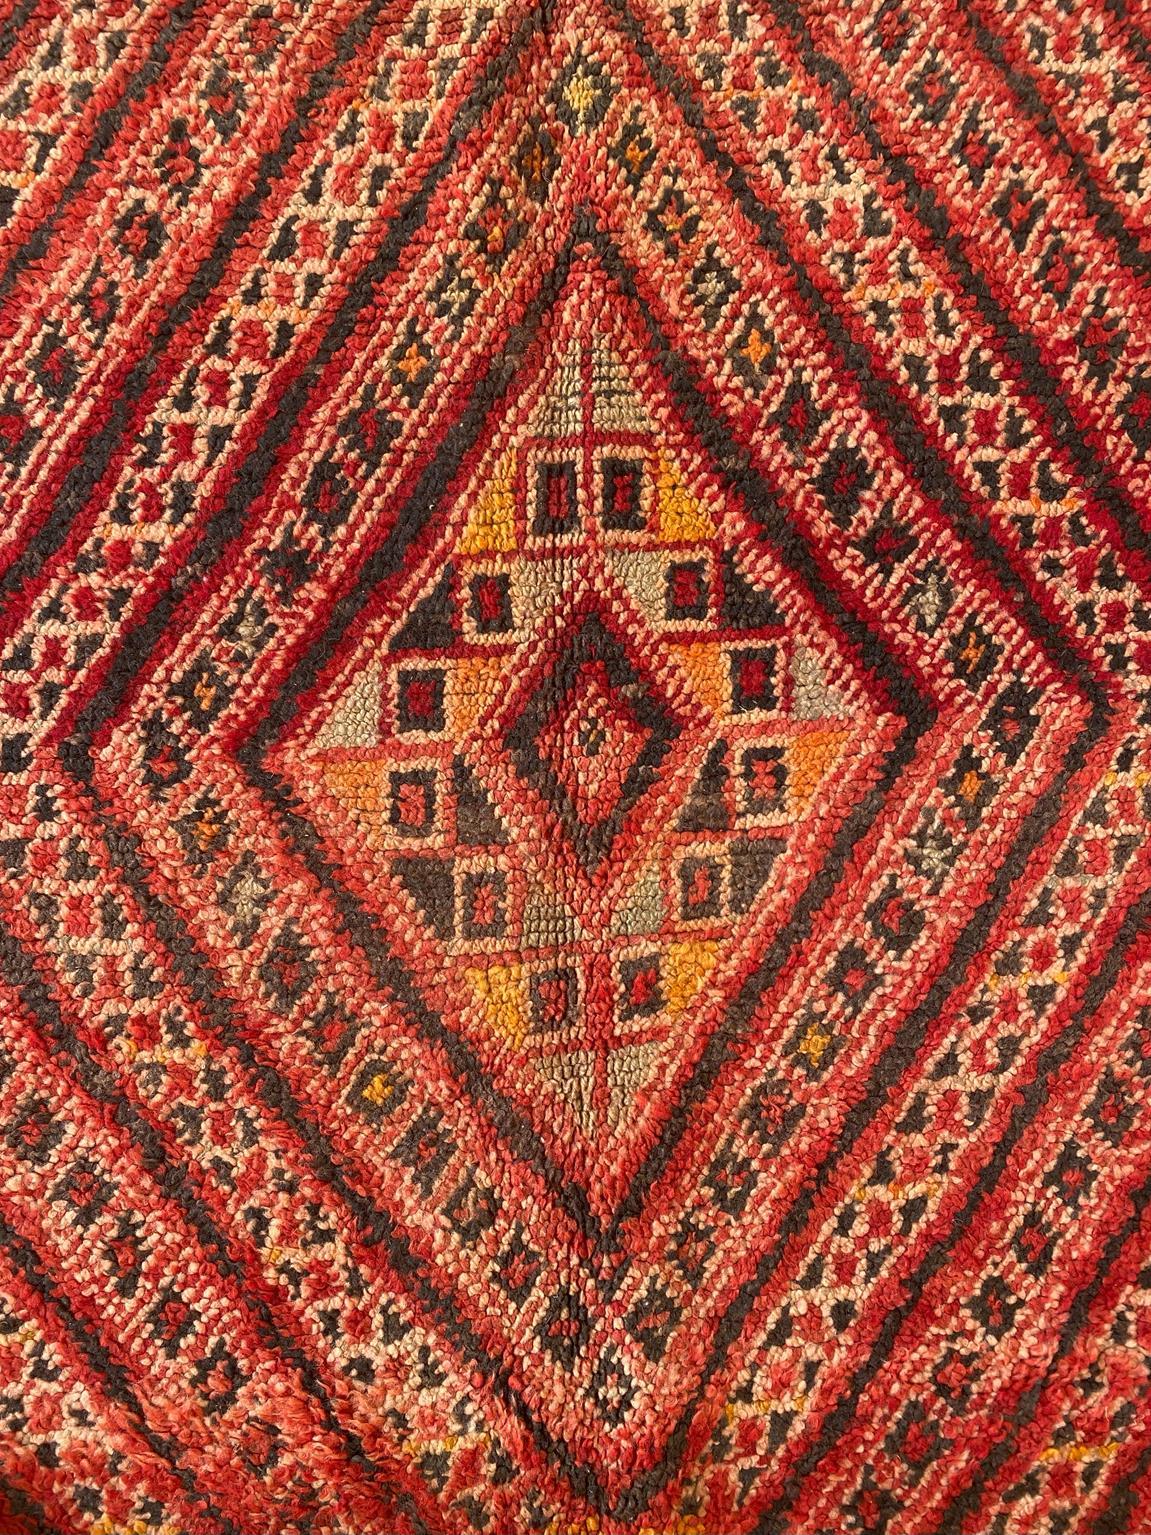 Vintage Moroccan Zayane rug - Red - 6.7x11.3feet / 205x344cm For Sale 3